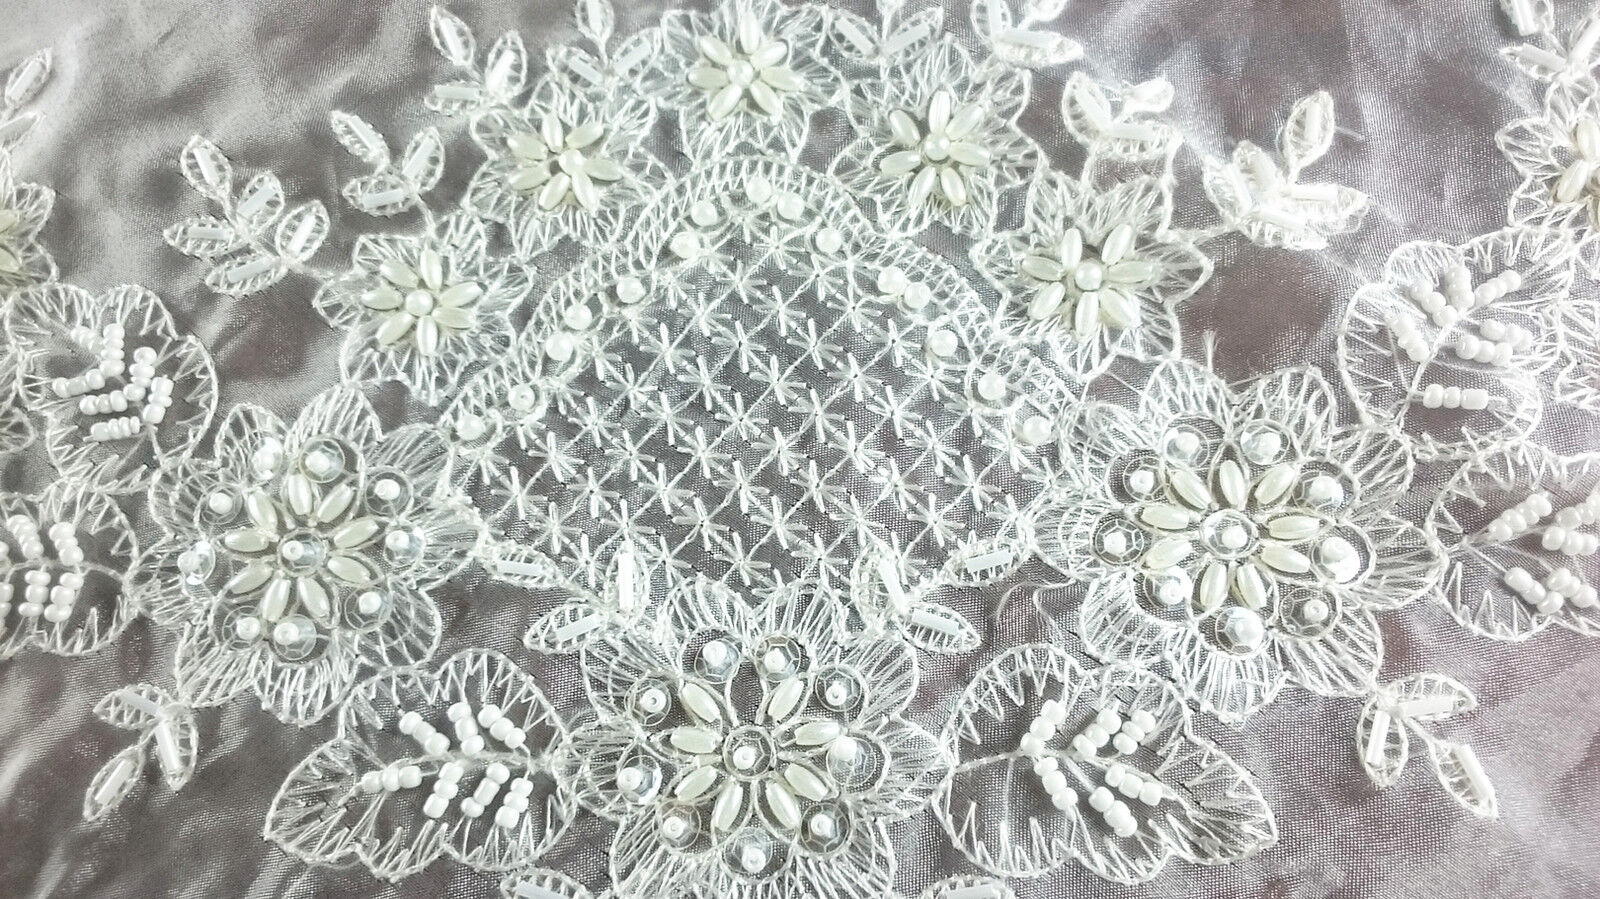 Embroidery Handmade Beaded Pearl Embroidery 33x33